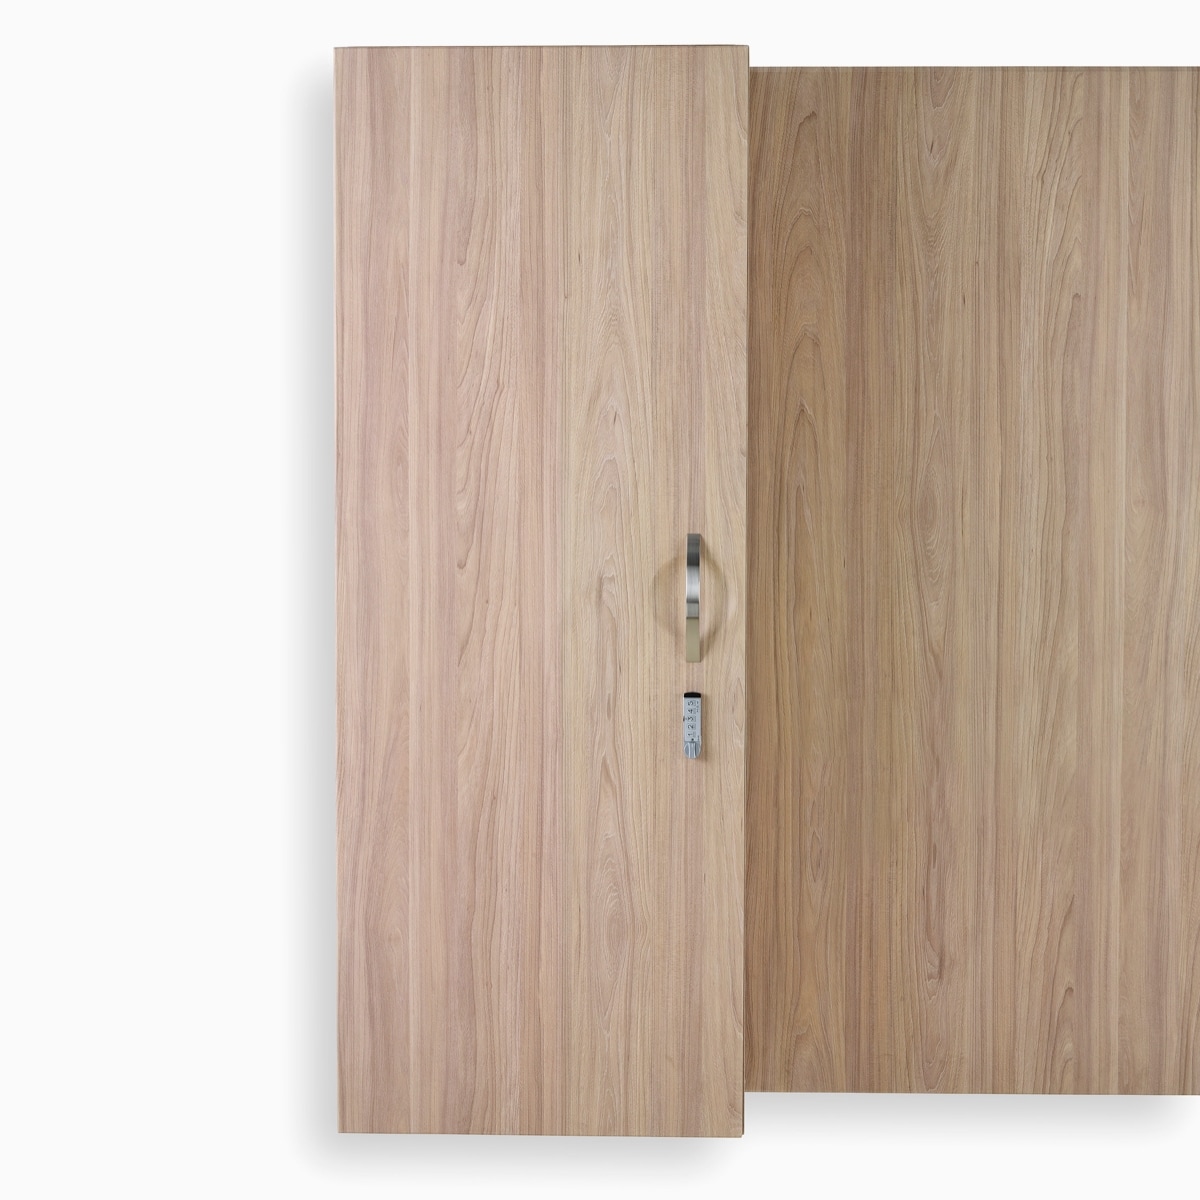 A close-up view of Compass System wardrobe cabinet in a medium wood finish.